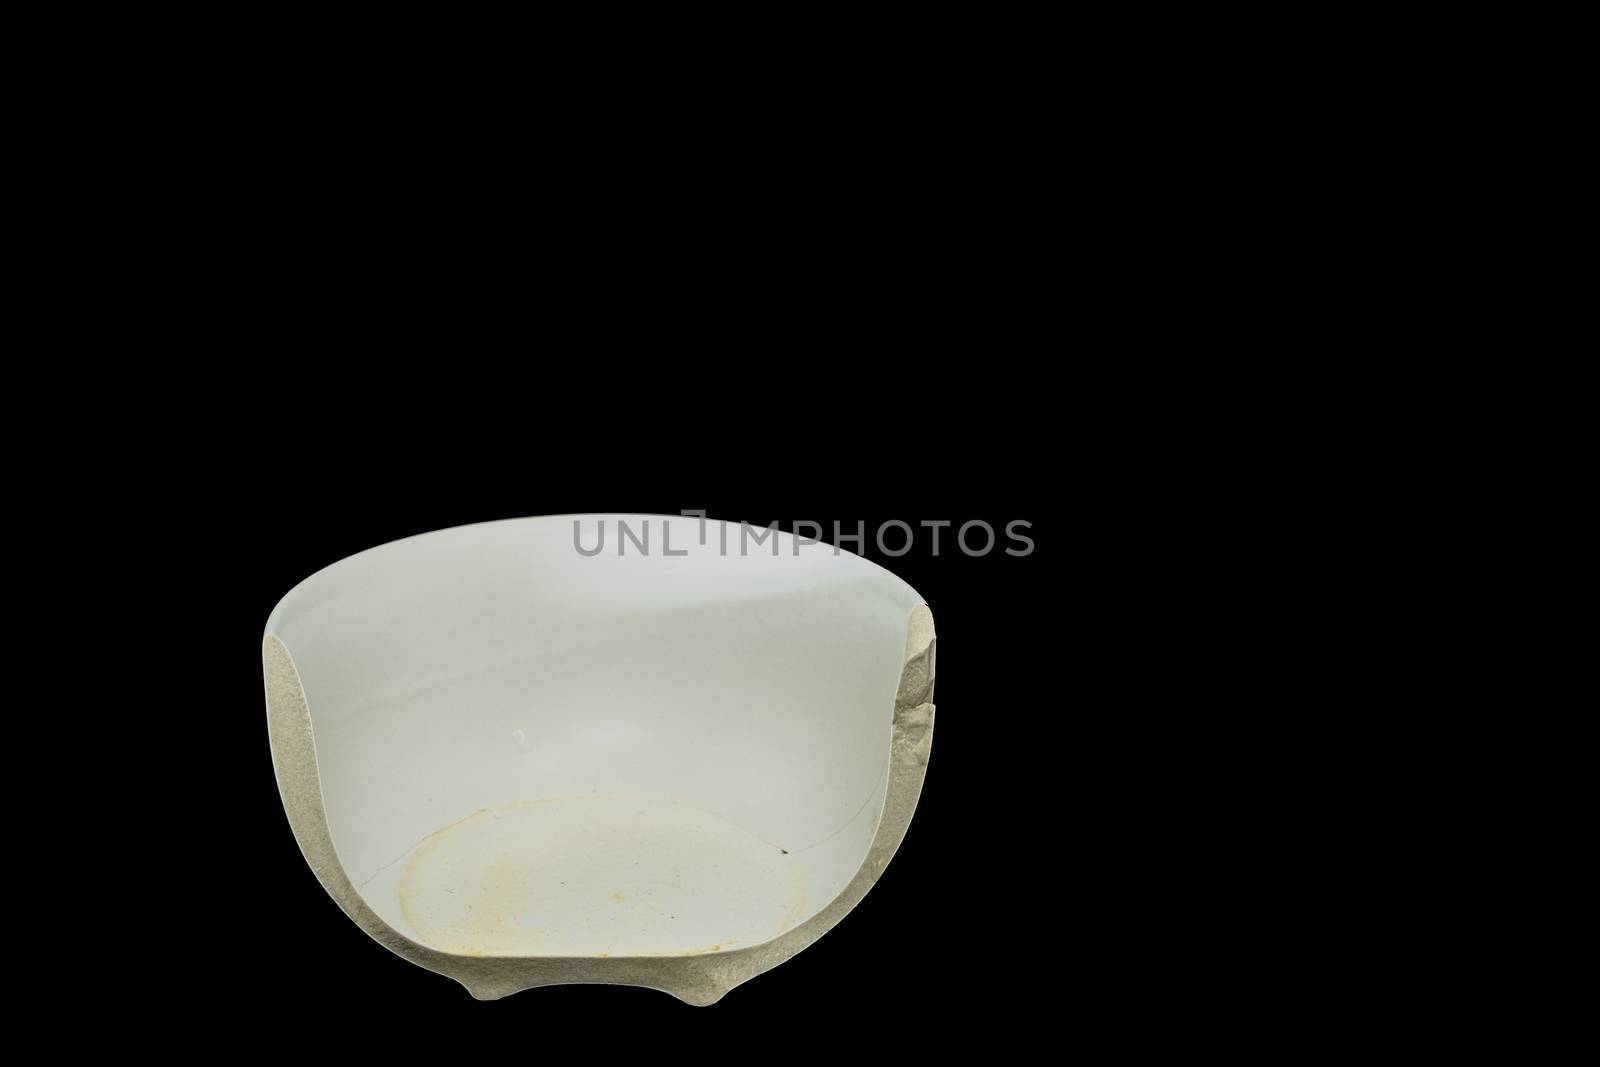 The Pieces of broken white ceramic bowl on black background. Copyspace, place for text. Break, fragment.